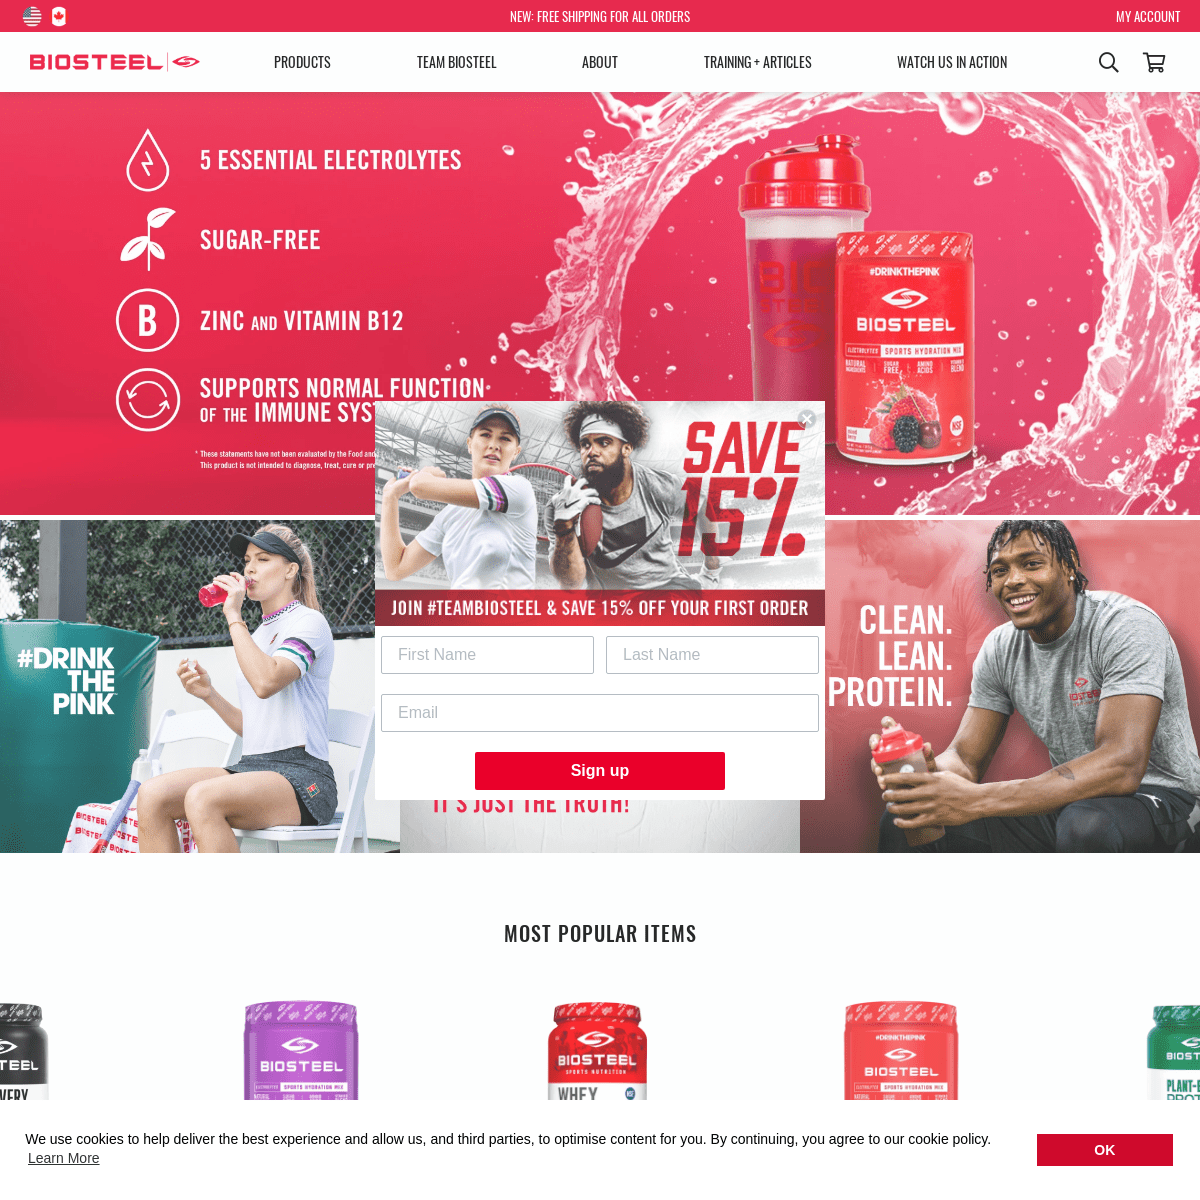 A complete backup of biosteel.com